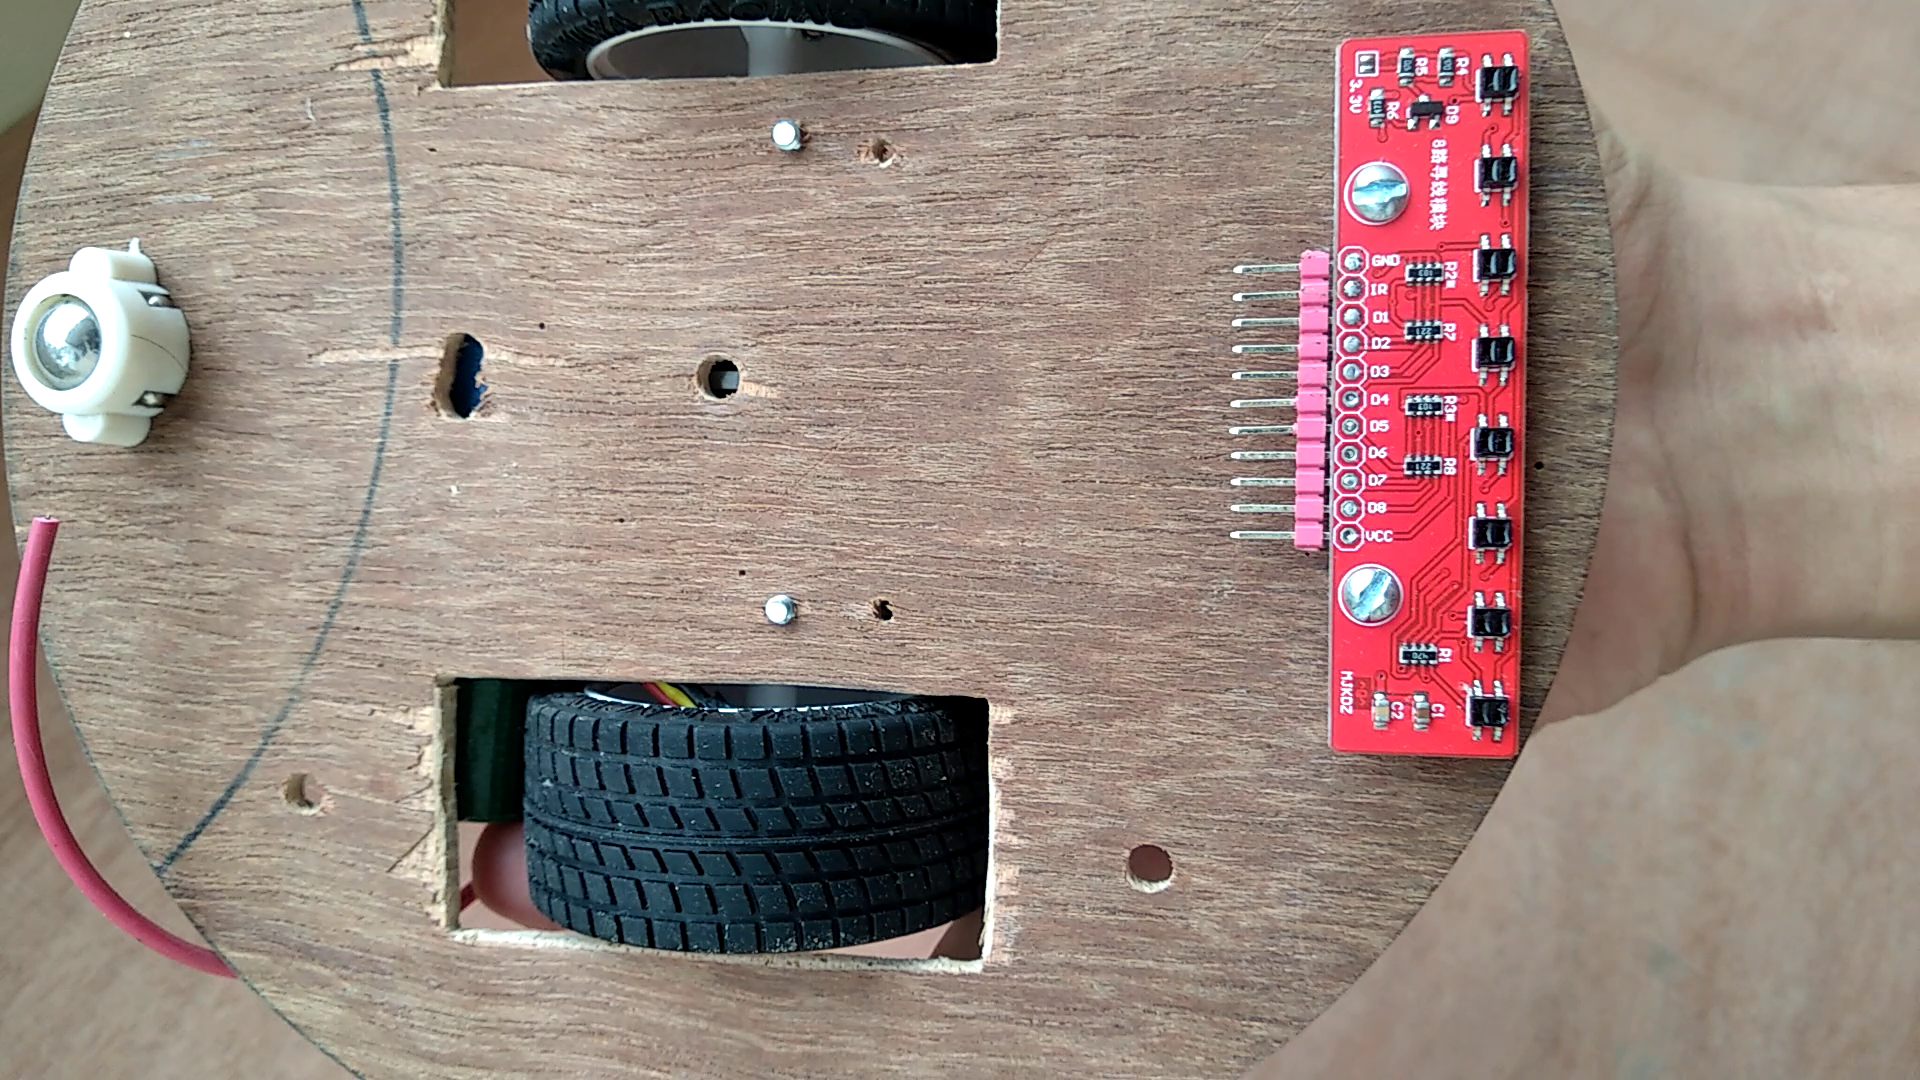 Mounting the ball caster and QTR sensor